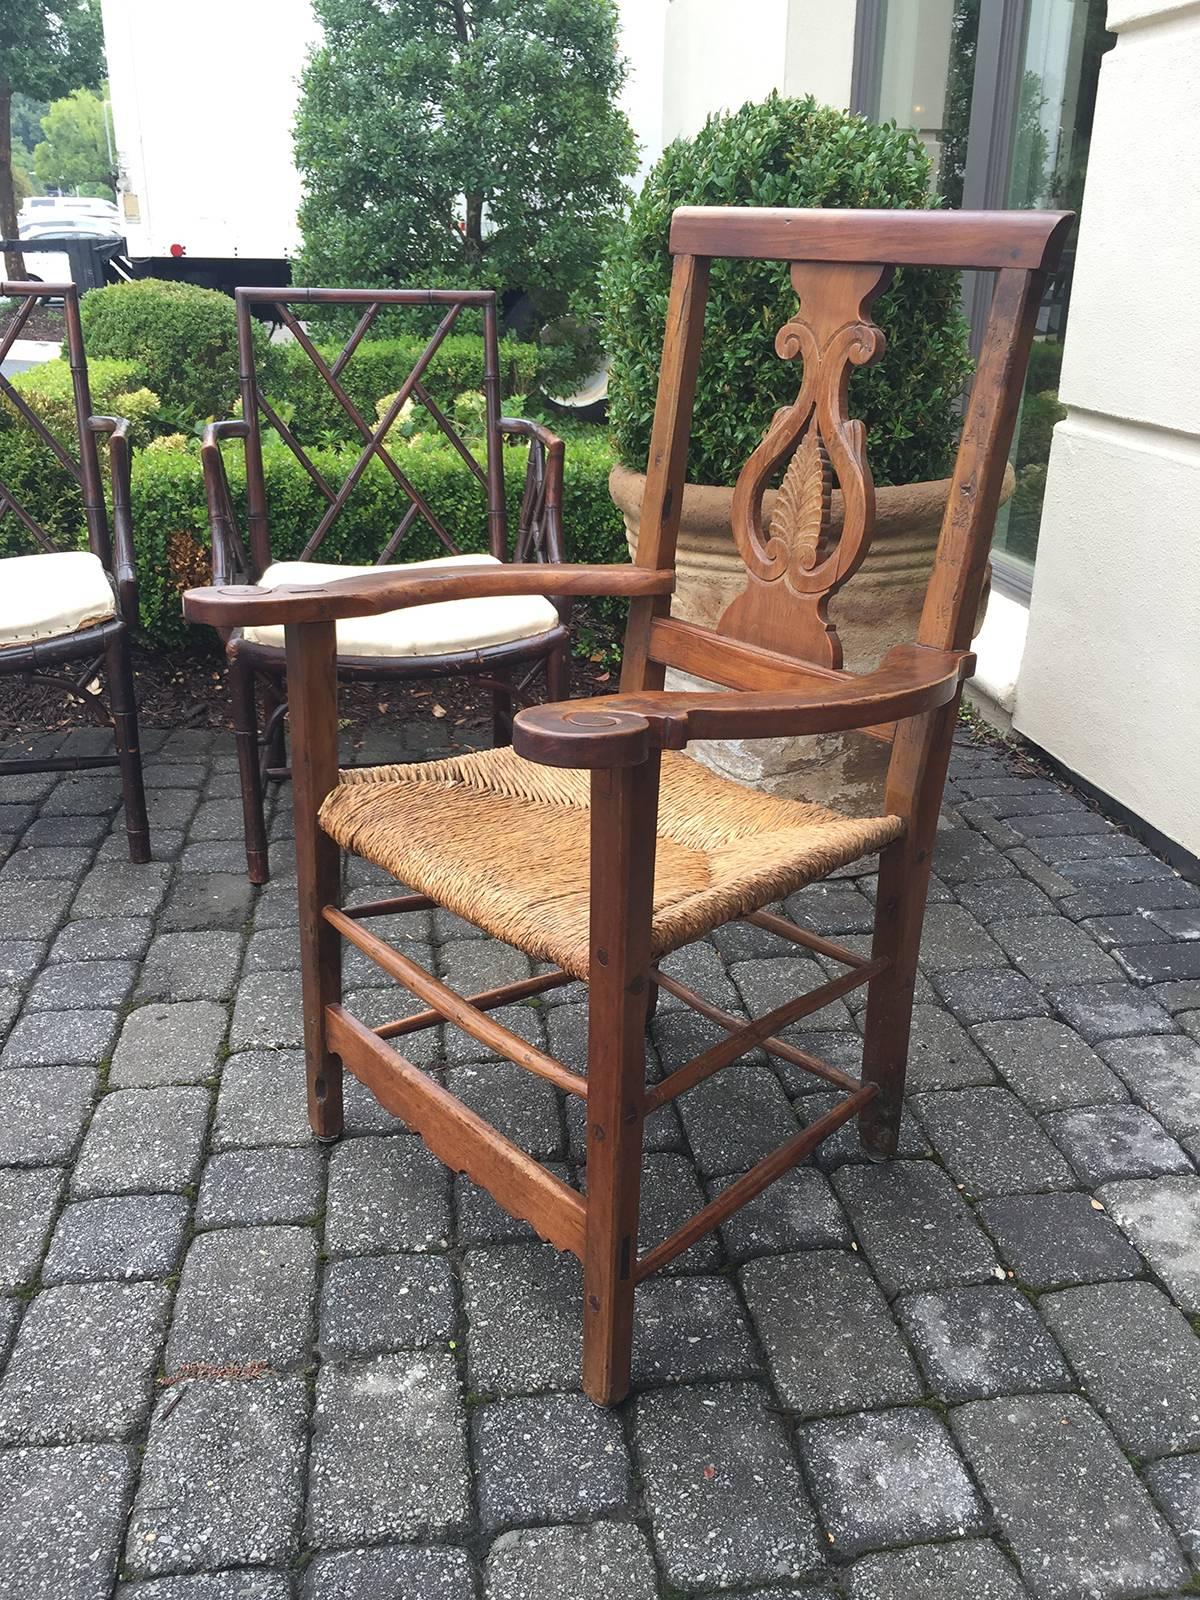 18th-19th century Provencial Italian chair, walnut with rush seat.